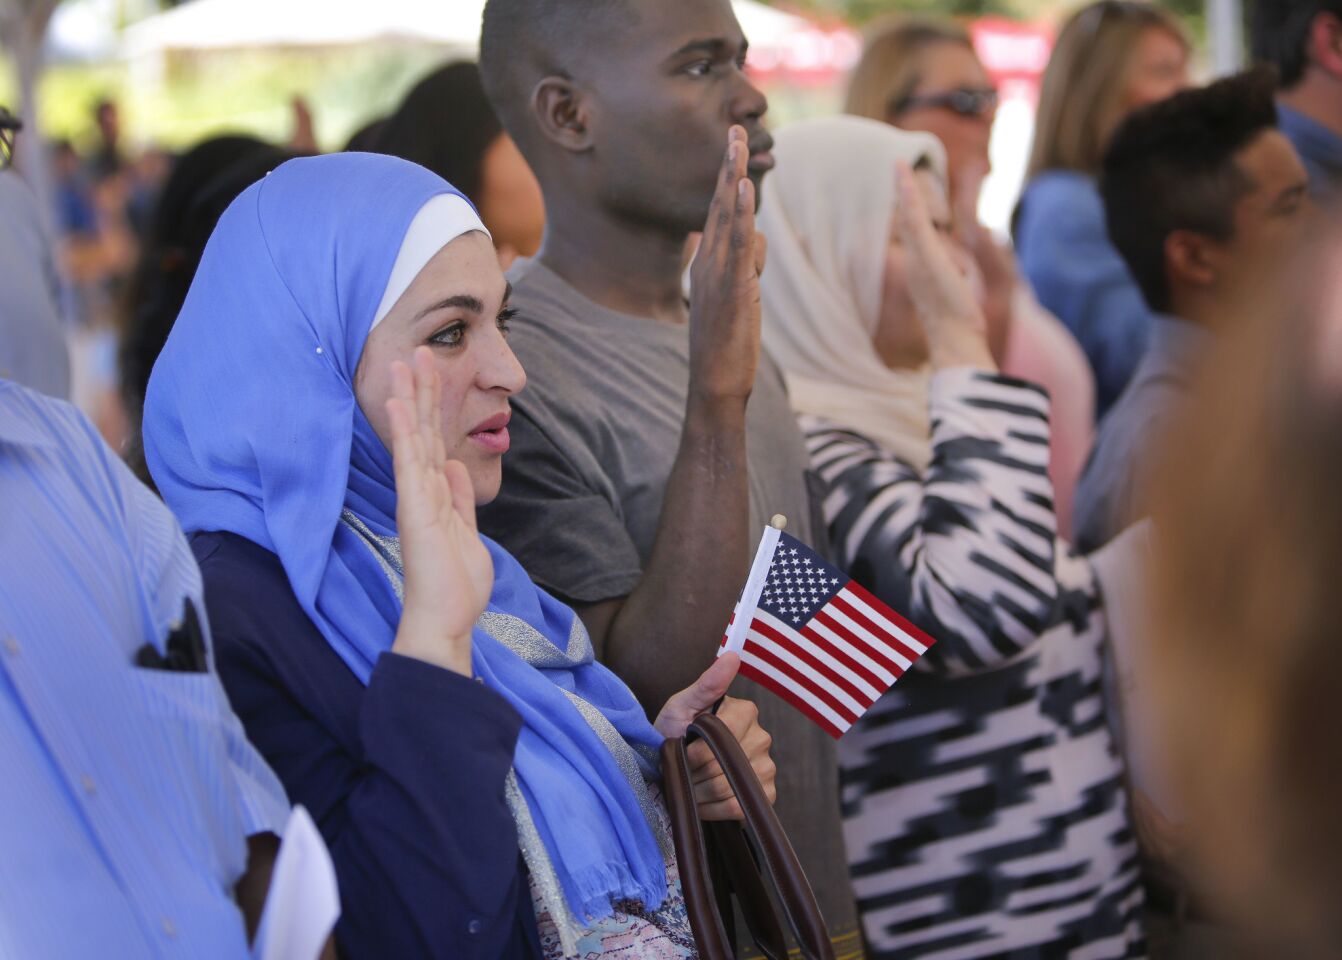 Duaa Saeed, originally from Jordan, was one of about 100 people from about 54 countries who took the Oath of Allegiance to the United States of America and became naturalized U.S. citizens during a naturalization ceremony held in Centennial Plaza near El Cajon City Hall to kickoff El Cajon's, America on Main Street festivities.